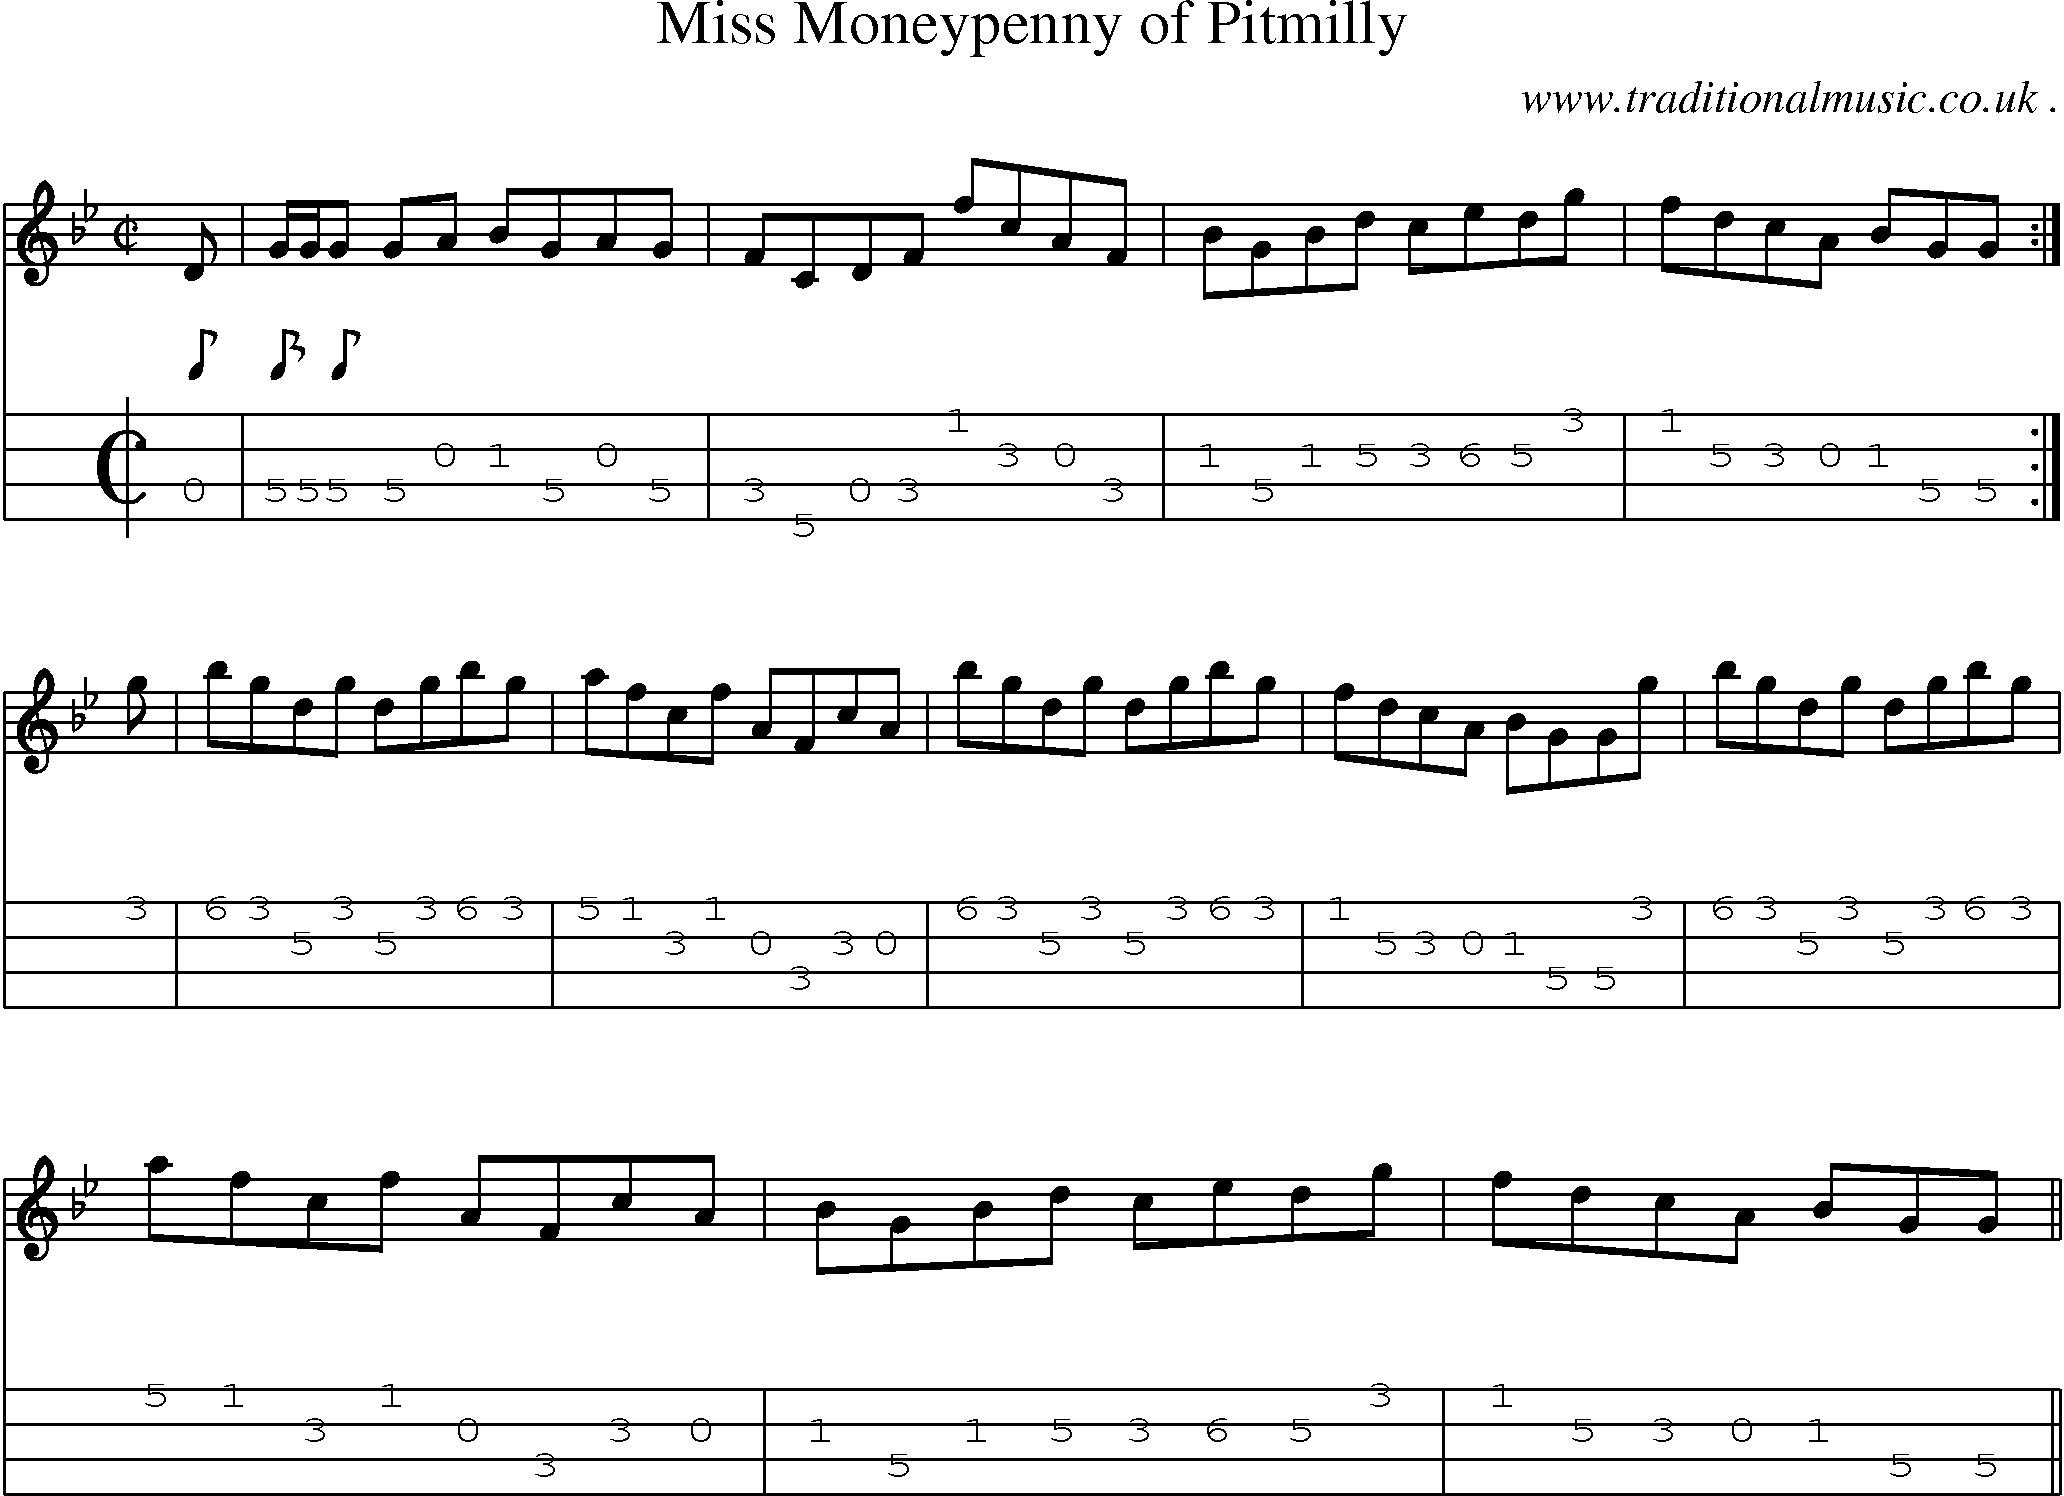 Sheet-music  score, Chords and Mandolin Tabs for Miss Moneypenny Of Pitmilly